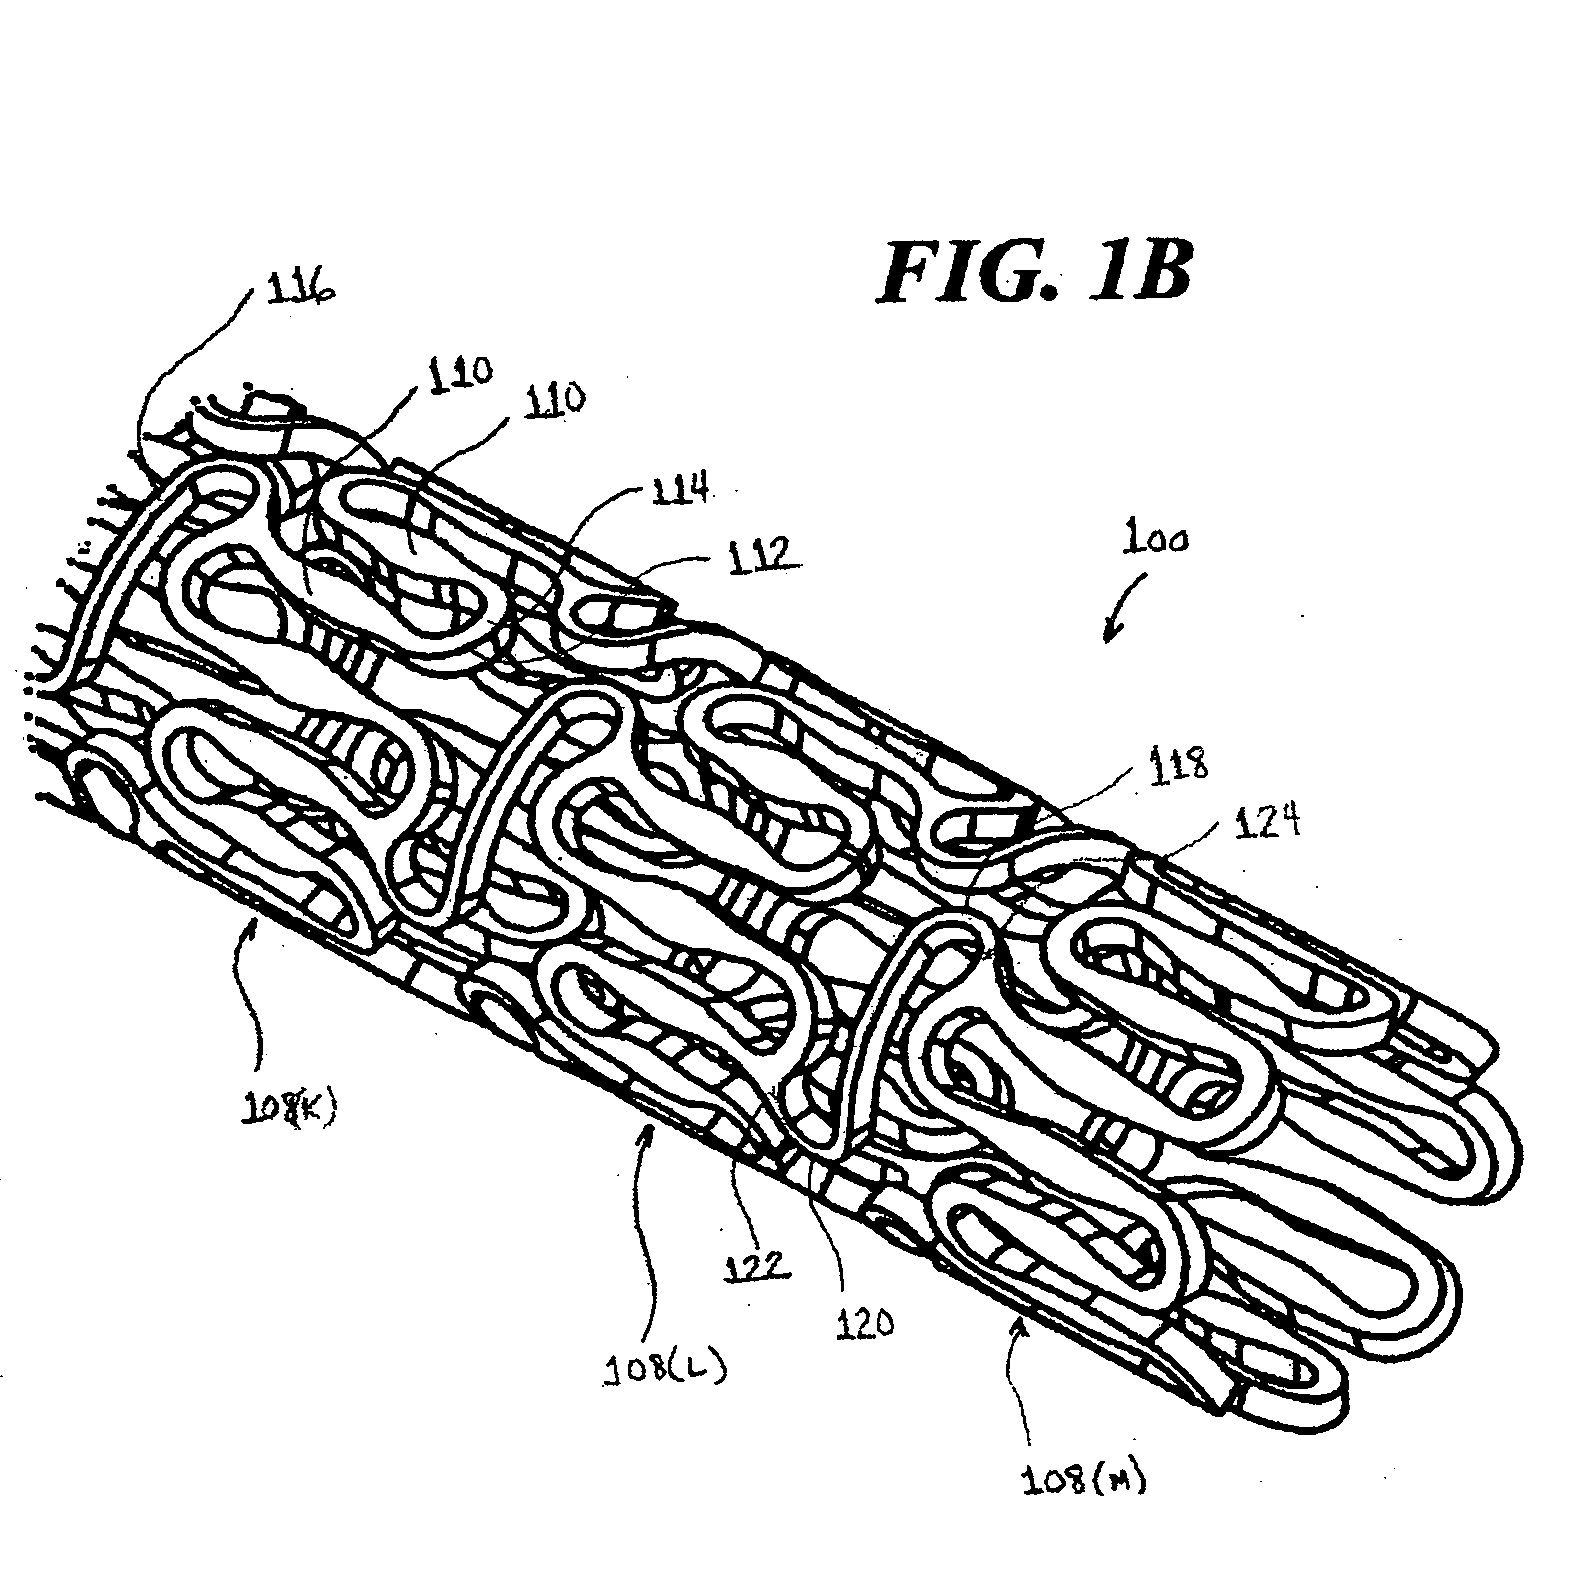 Apparatus for treating a bifurcated region of a conduit